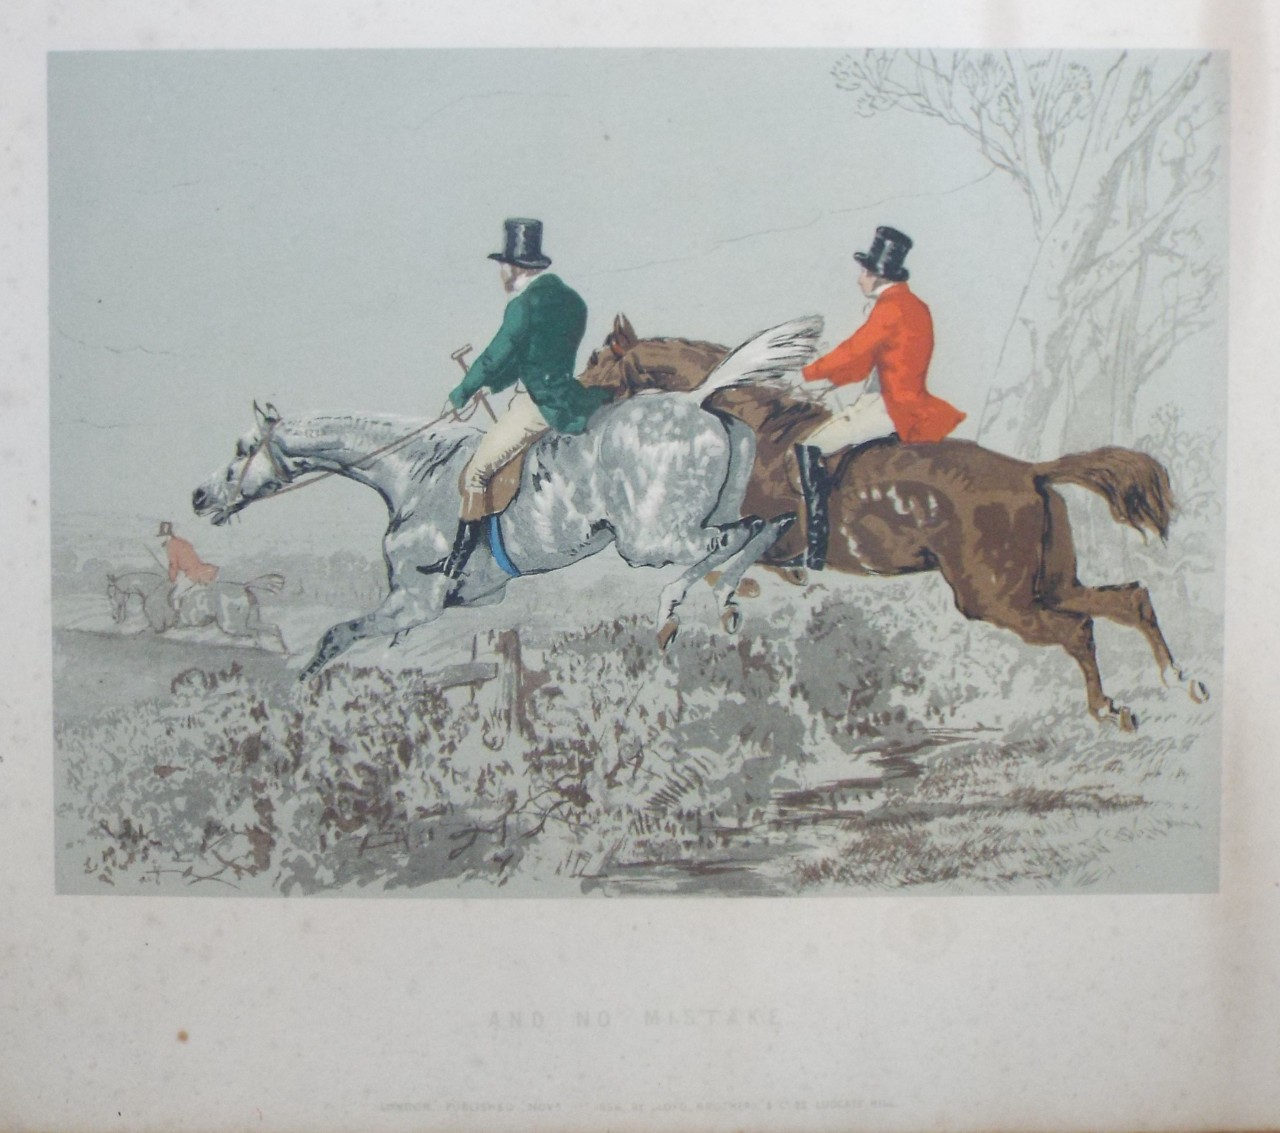 Chromo-lithograph - Herring's Sporting Sketches. And No Mistake.